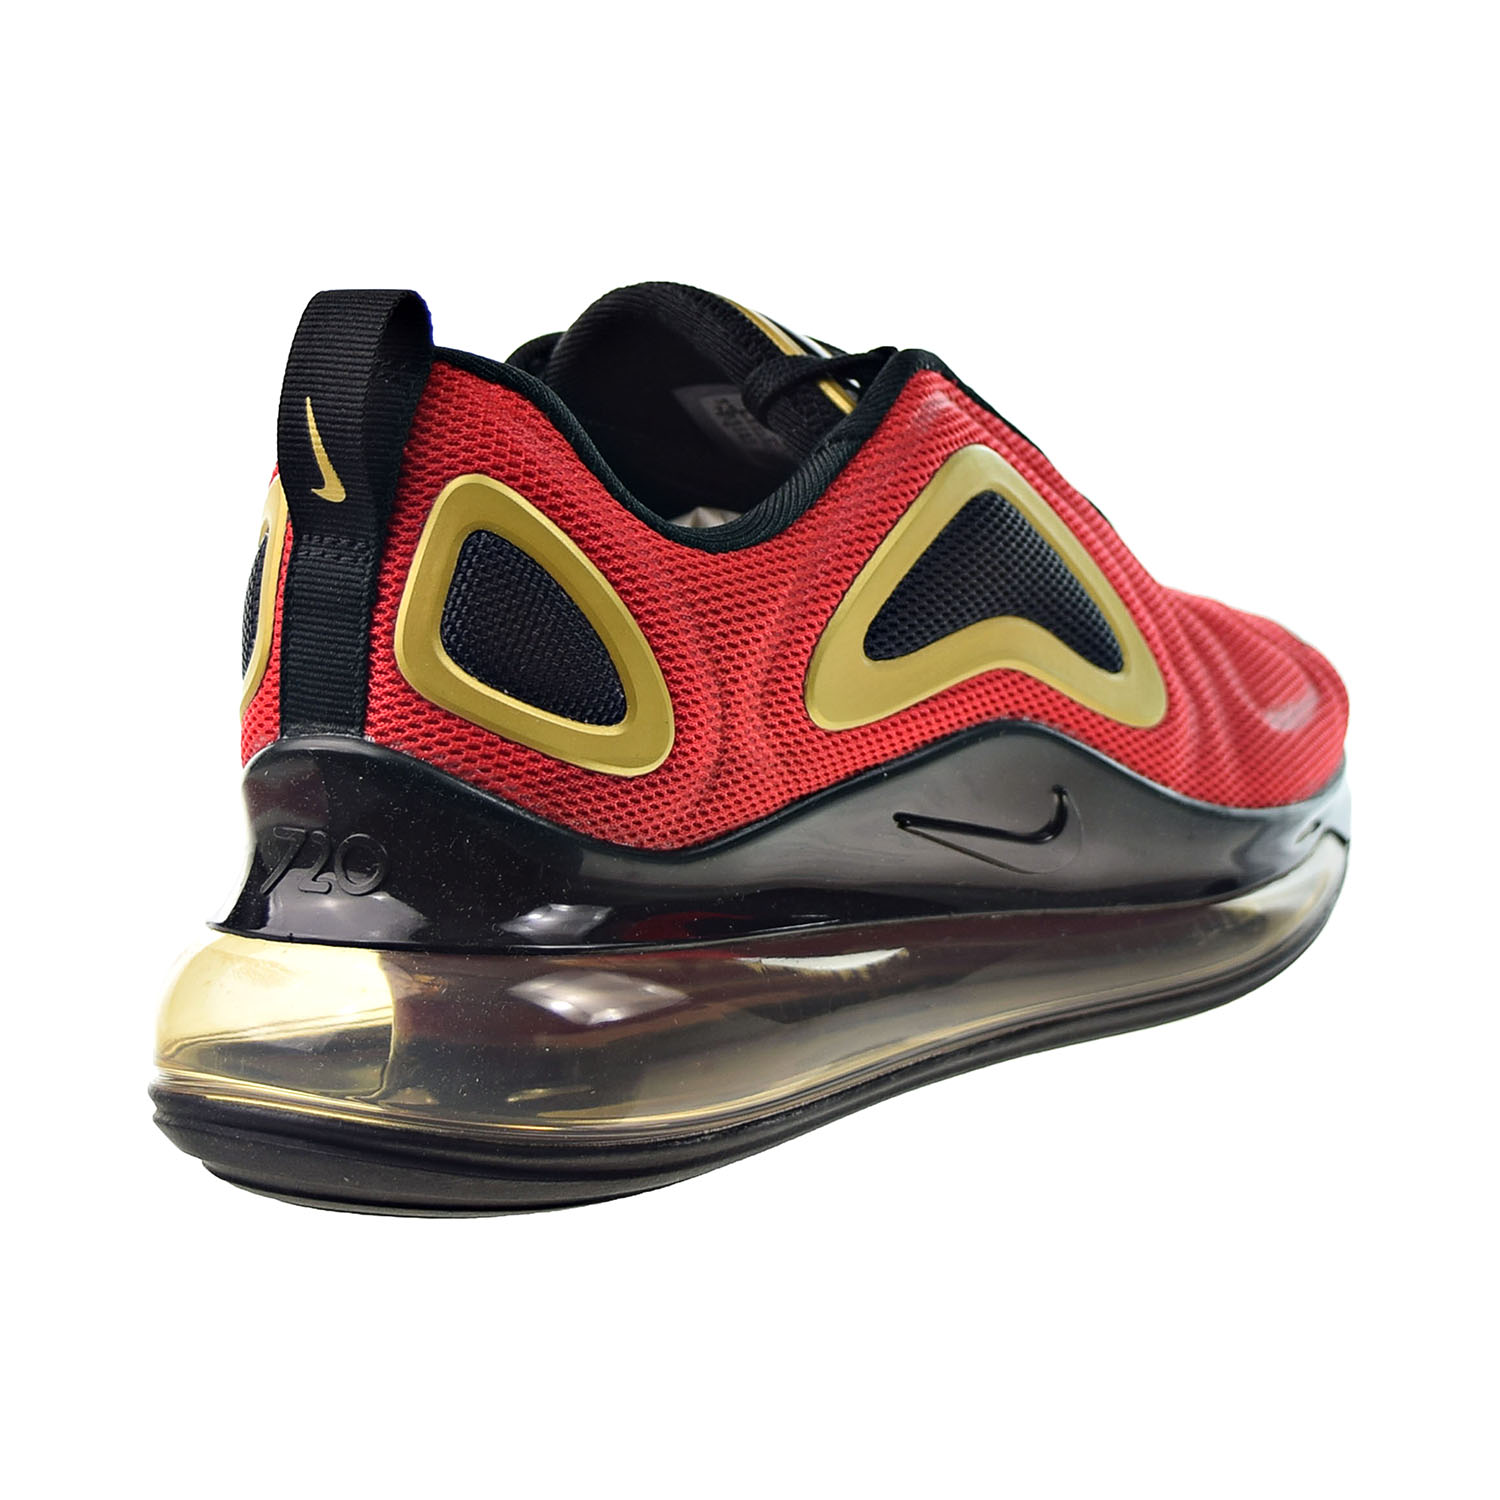 Nike Air Max 720 Women's Shoes University Red-Black cu4871-600 - image 3 of 6